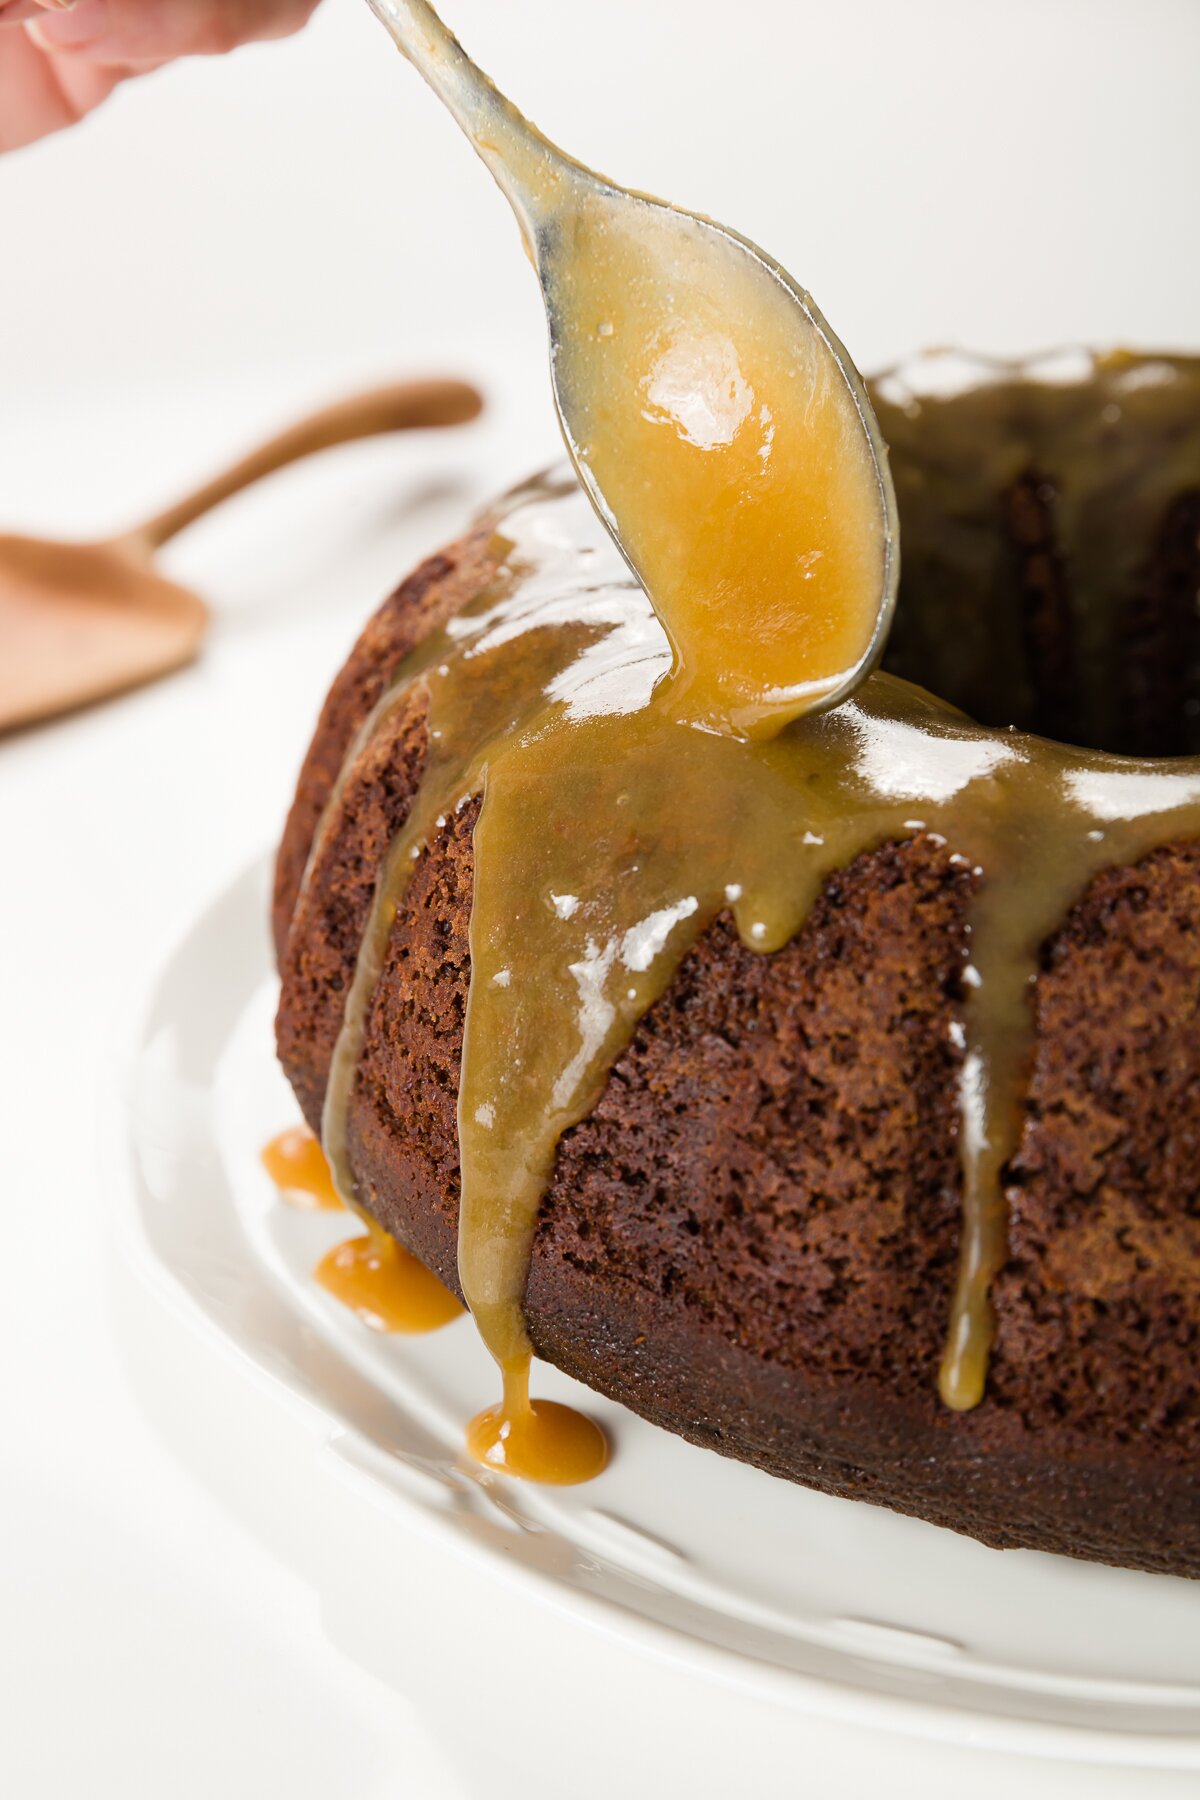 Pouring whiskey sauce over chocolate cake with a spoon